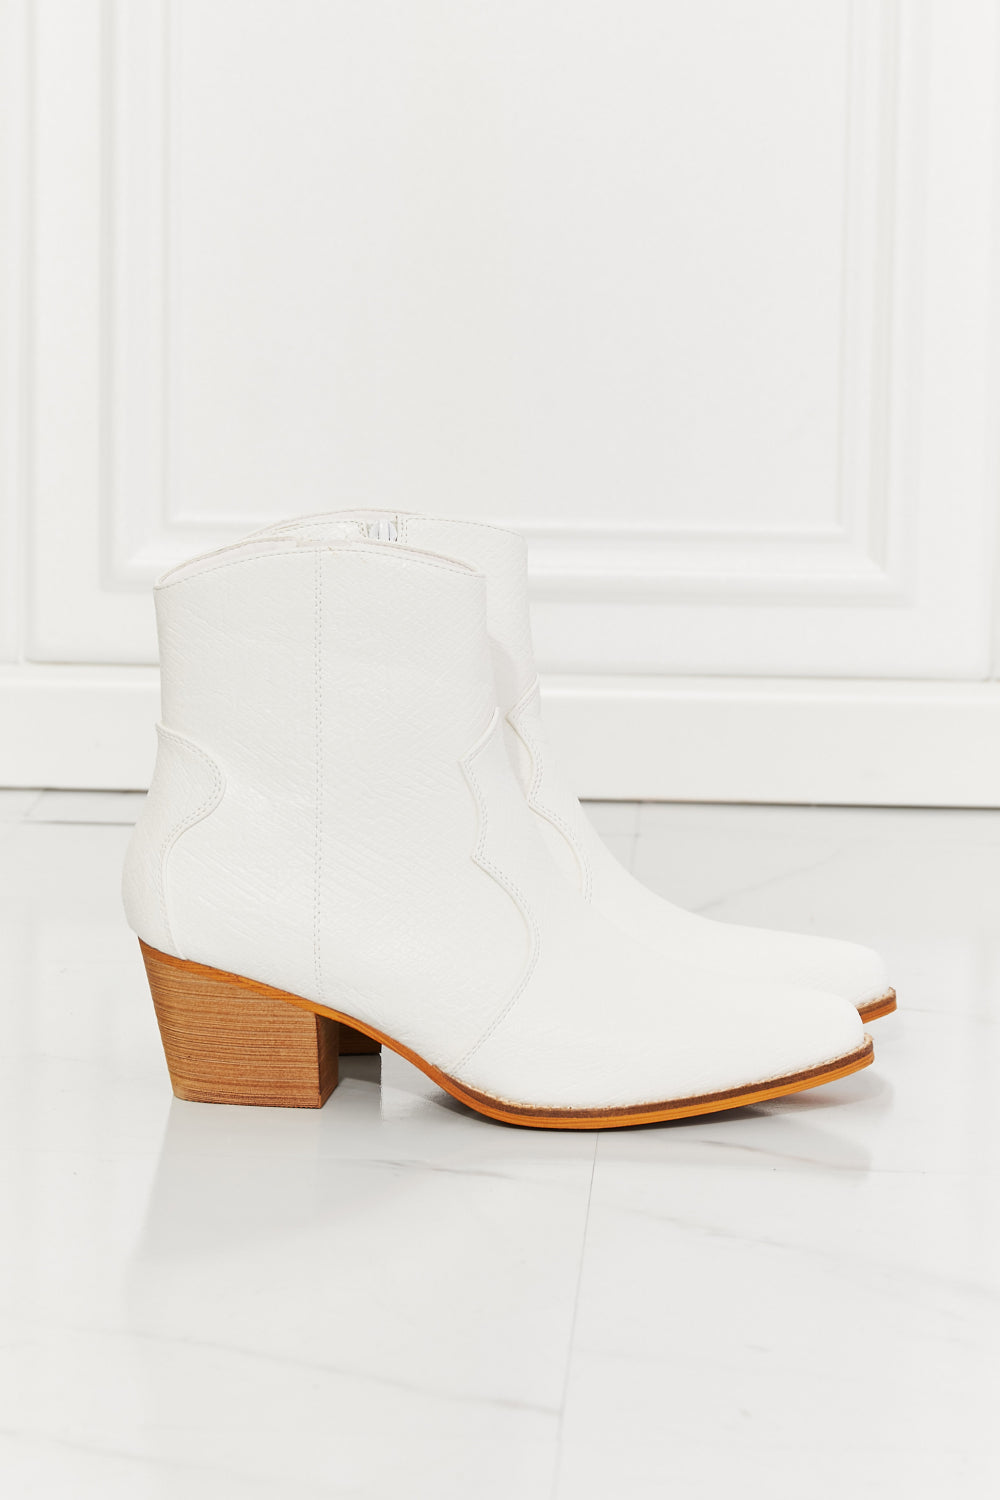 MMShoes Faux Leather Western Cowboy Style Ankle Bootie Boots Pointy Toe in White Watertower Town